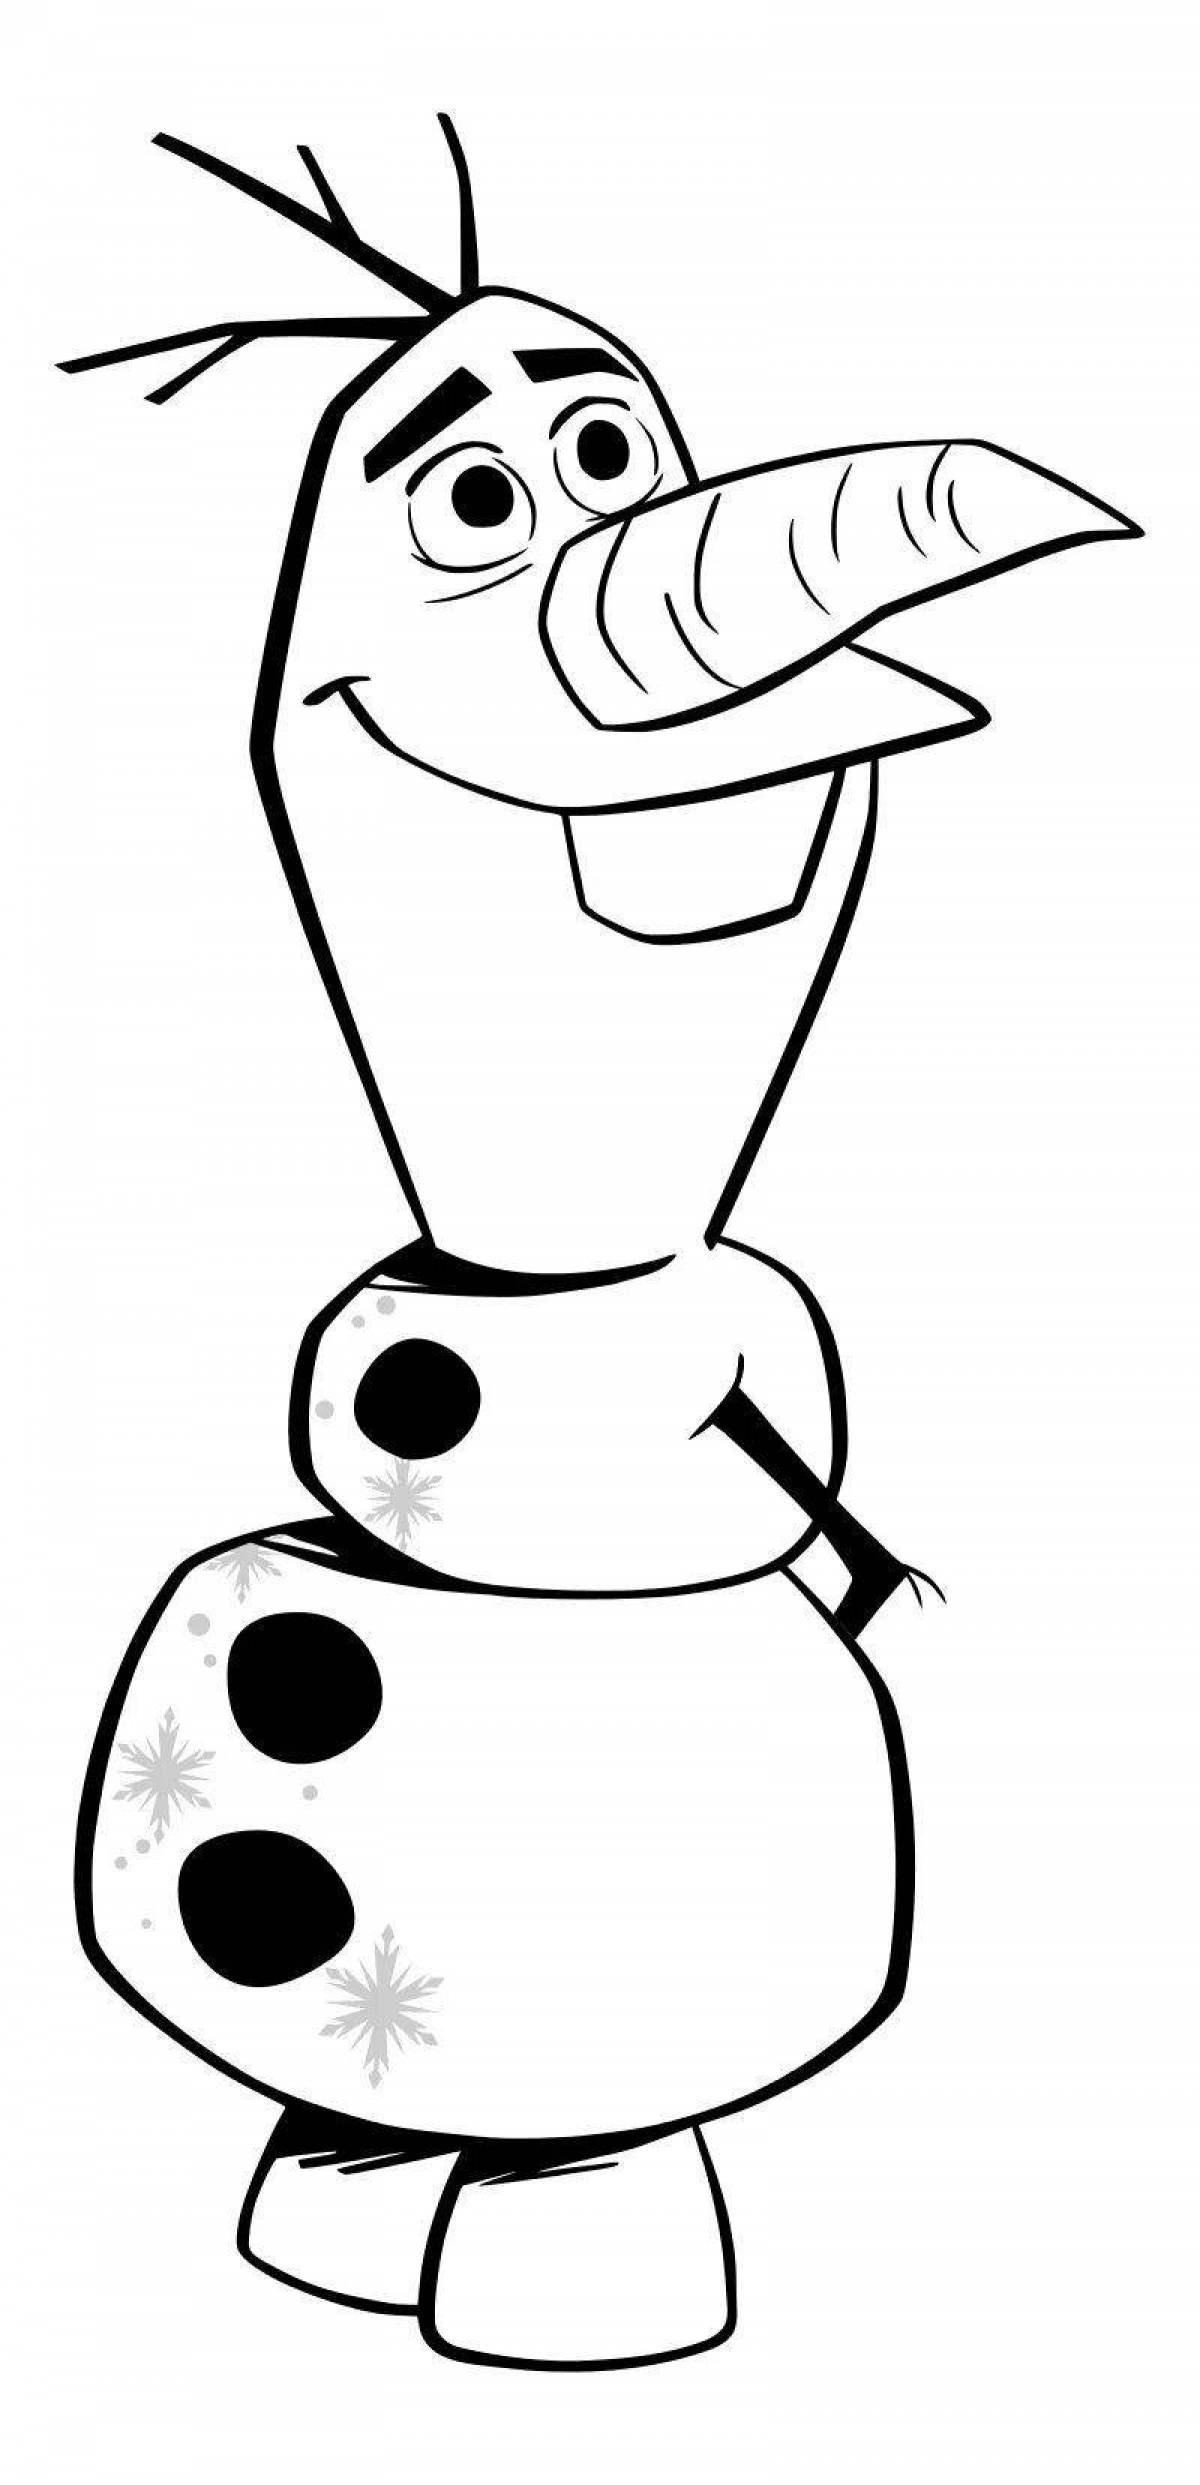 Olaf's happy coloring for kids